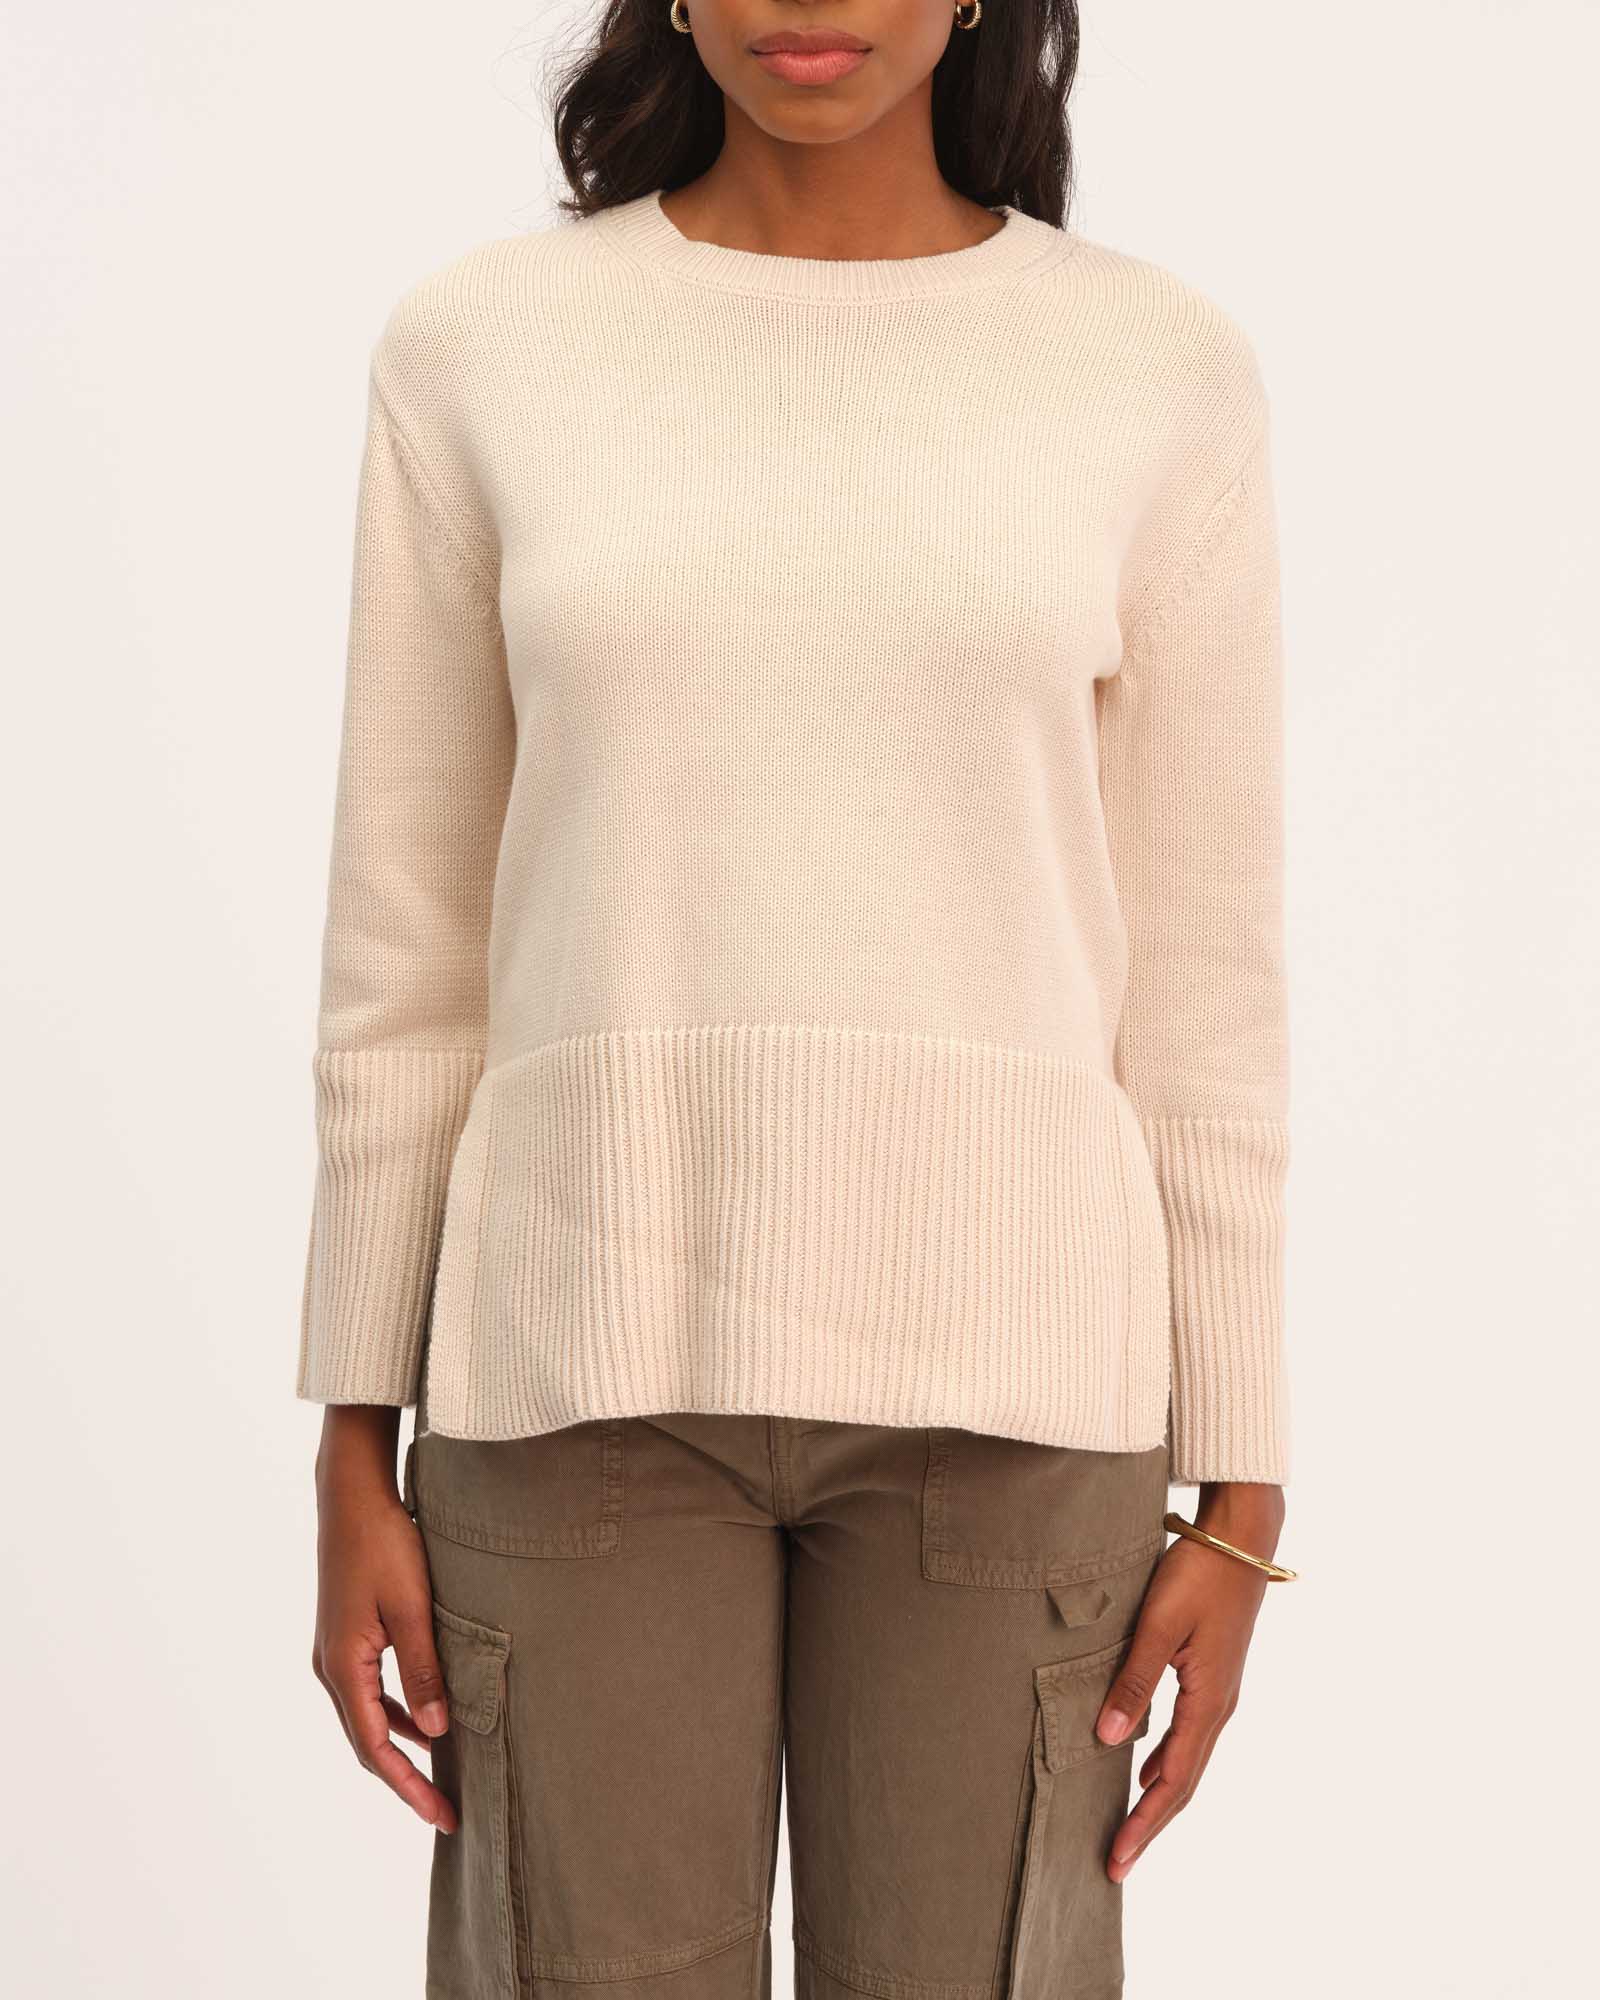 Shop For The Republic Women's Classic Crewneck Sweater with Side Vents | JANE + MERCER